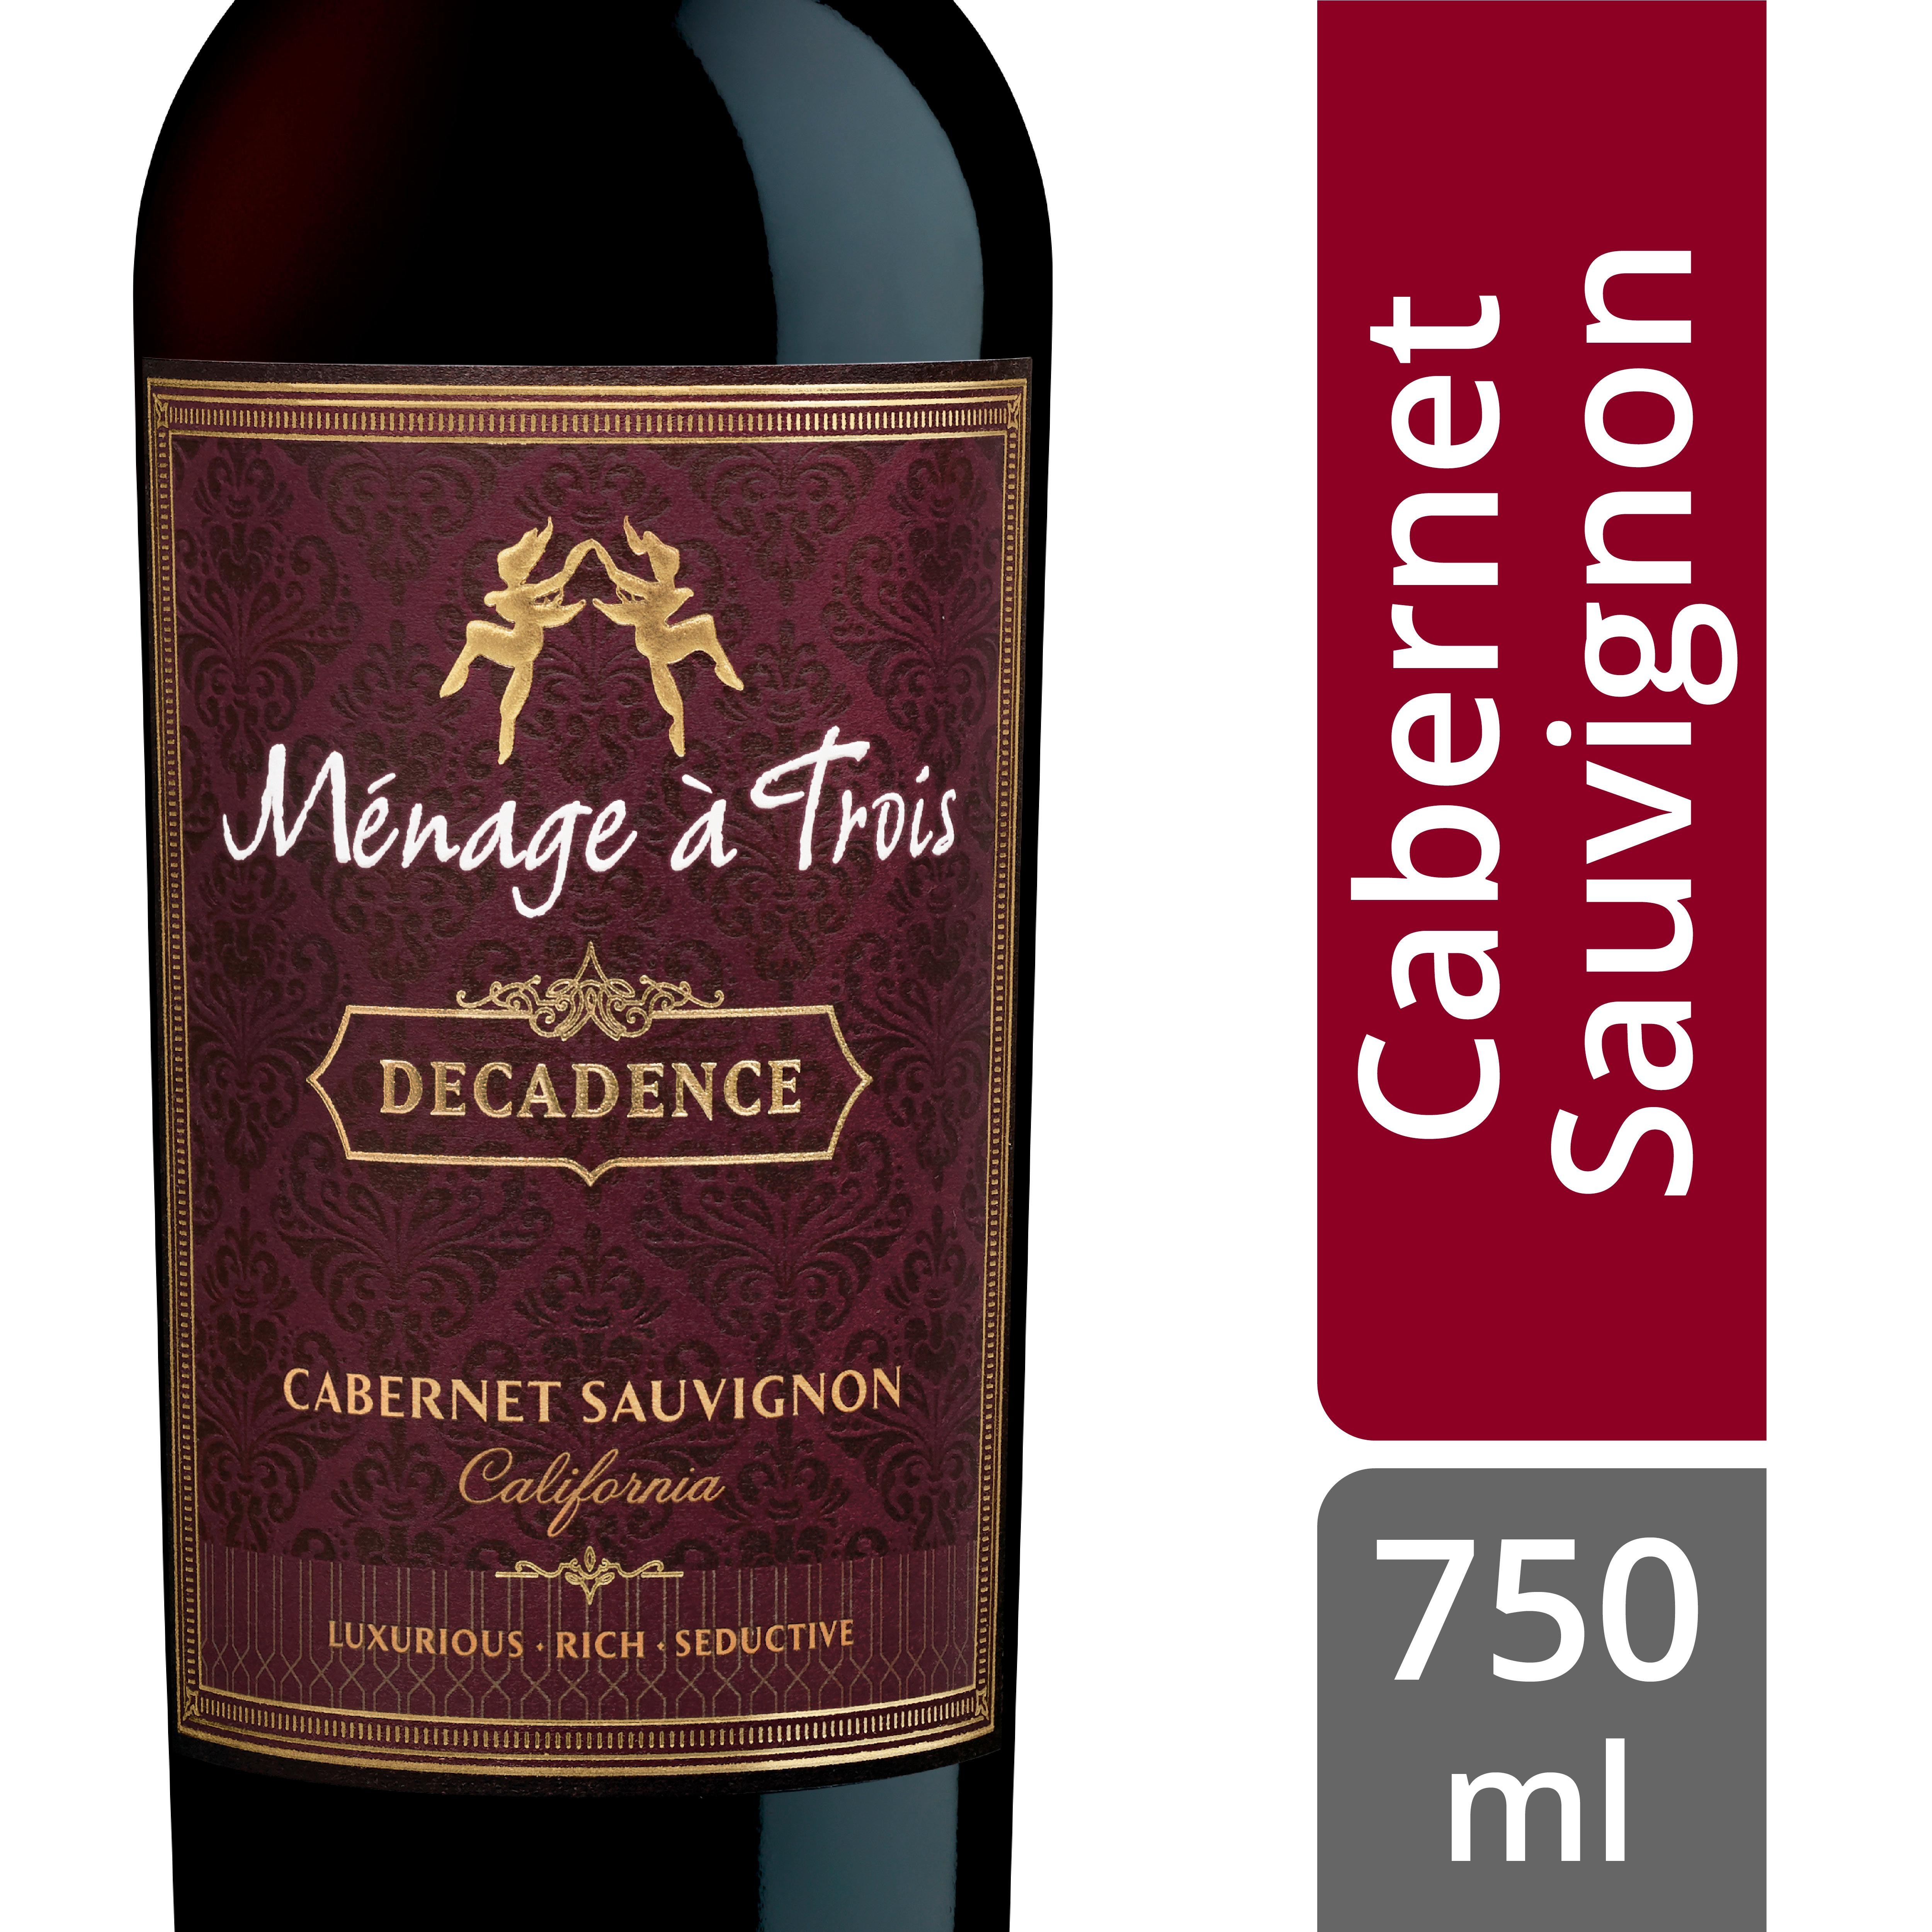 Menage a Menage a Trois Decadence Cabernet Sauvignon - Red Wine from California - 750ml Bottle